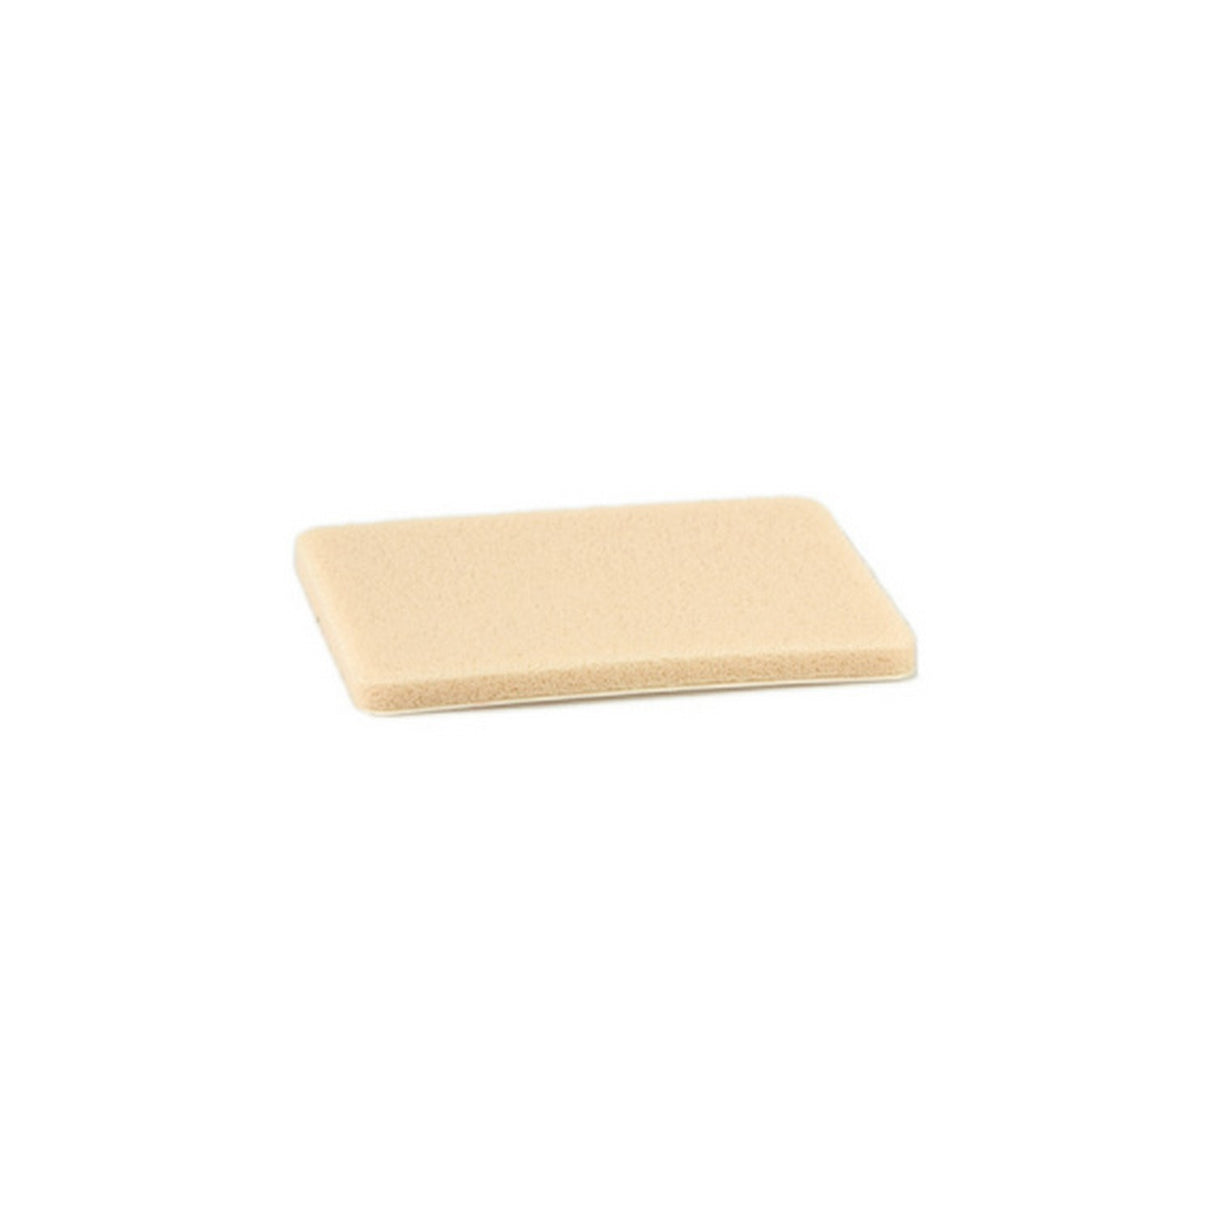 Lectrosonics 35924 Hypoallergenic Thermal Insulation Pad for SMD and SMQ Dual Battery Transmitters